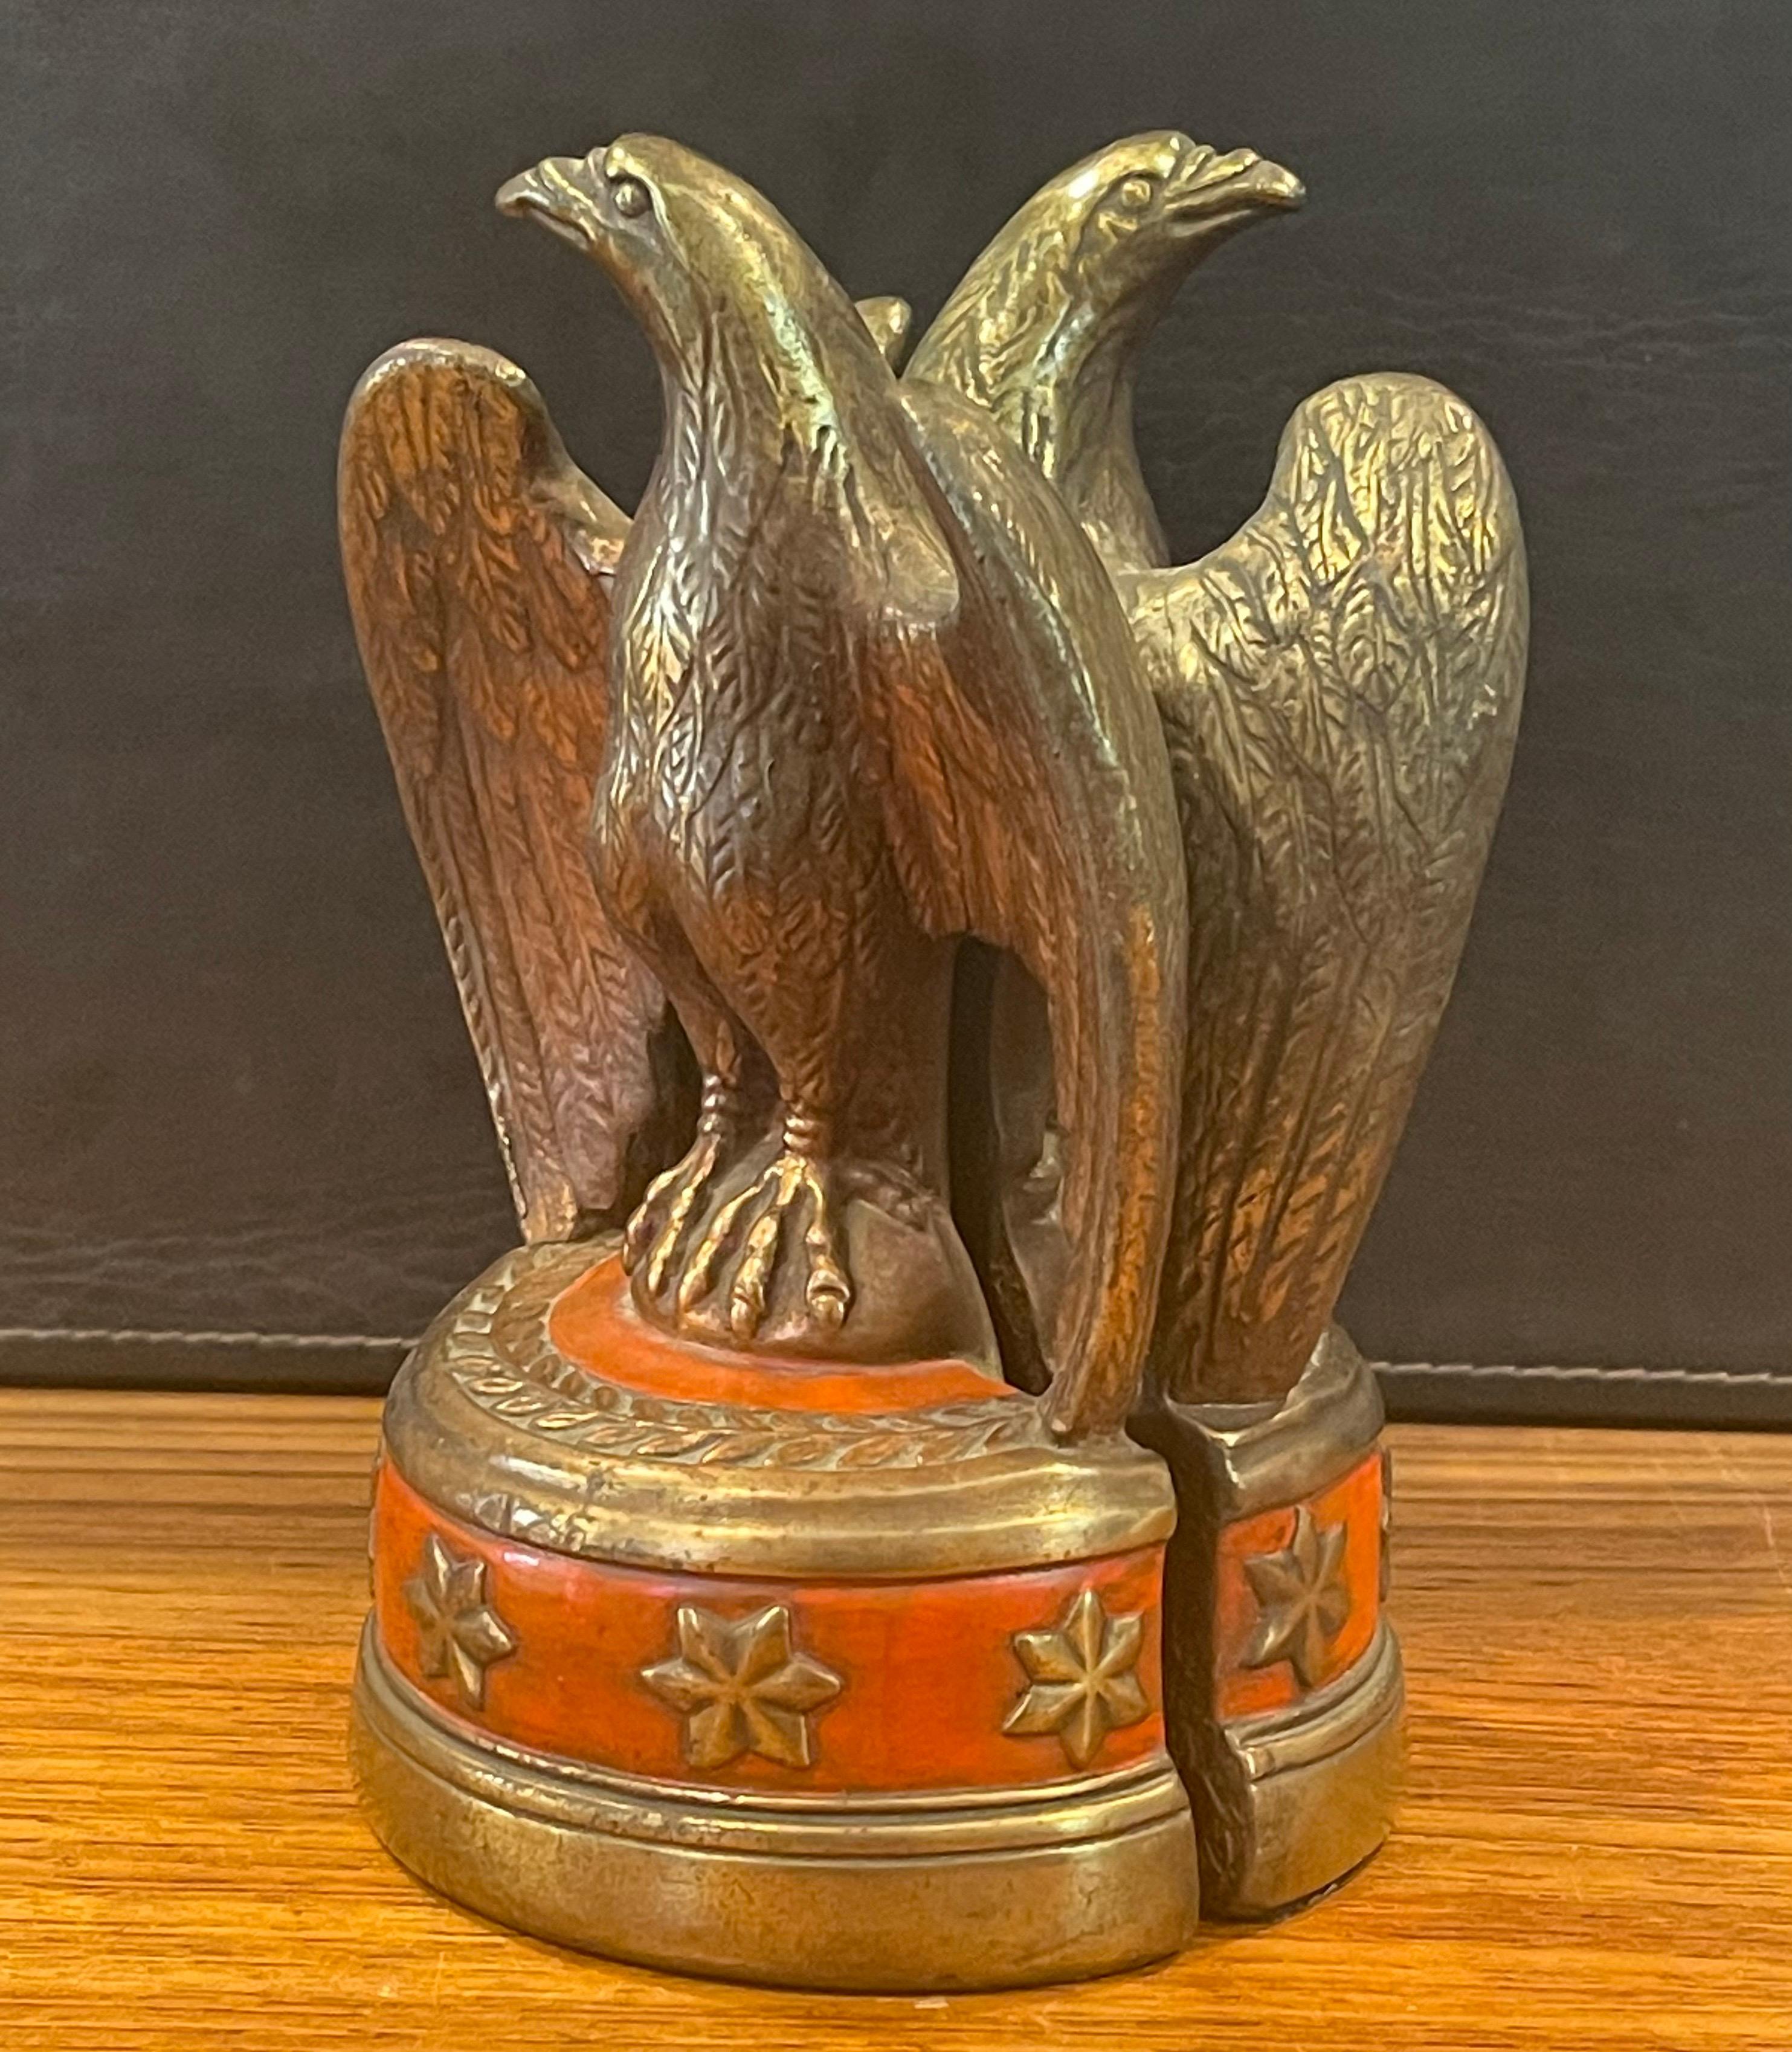 A striking pair of bronze clad American eagle bookends by Marion Bronze, circa 1940s. The eagles rest on a six star semi circle base with a red overlay and are in very good vintage condition. They measure 5.25